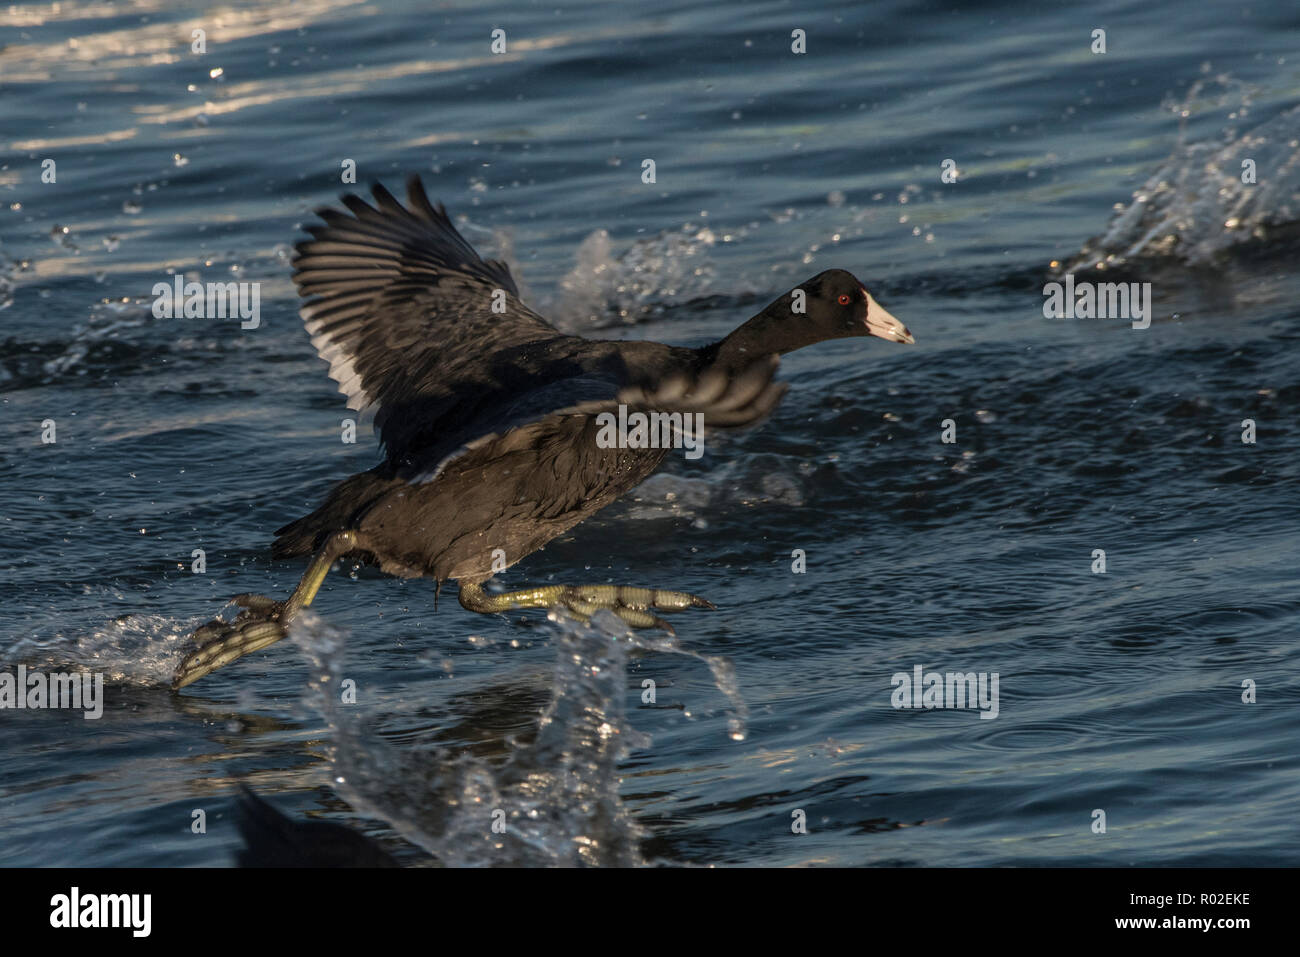 An American coot (Fulica americana) running on water to gain the momentum to take flight after a passing boat startled it. Stock Photo